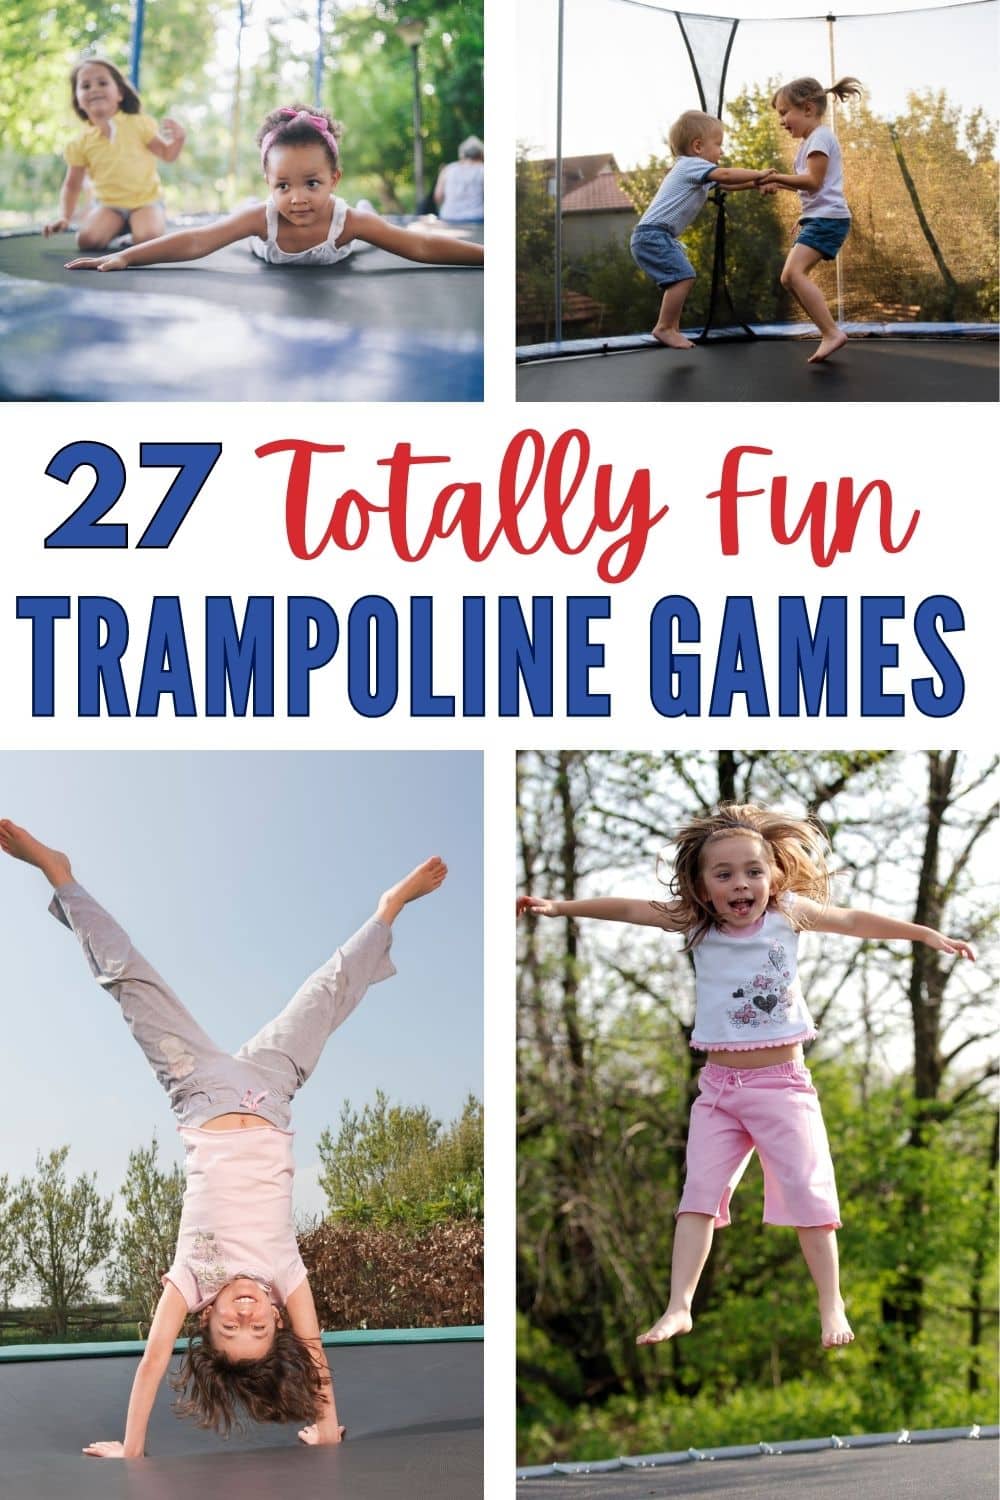 If you're looking for hours of bouncy fun, you're going to love this collection of the 27 best trampoline games you can play with your family. #trampoline #outdooractivities #familyfun #trampolinegames via @wondermomwannab